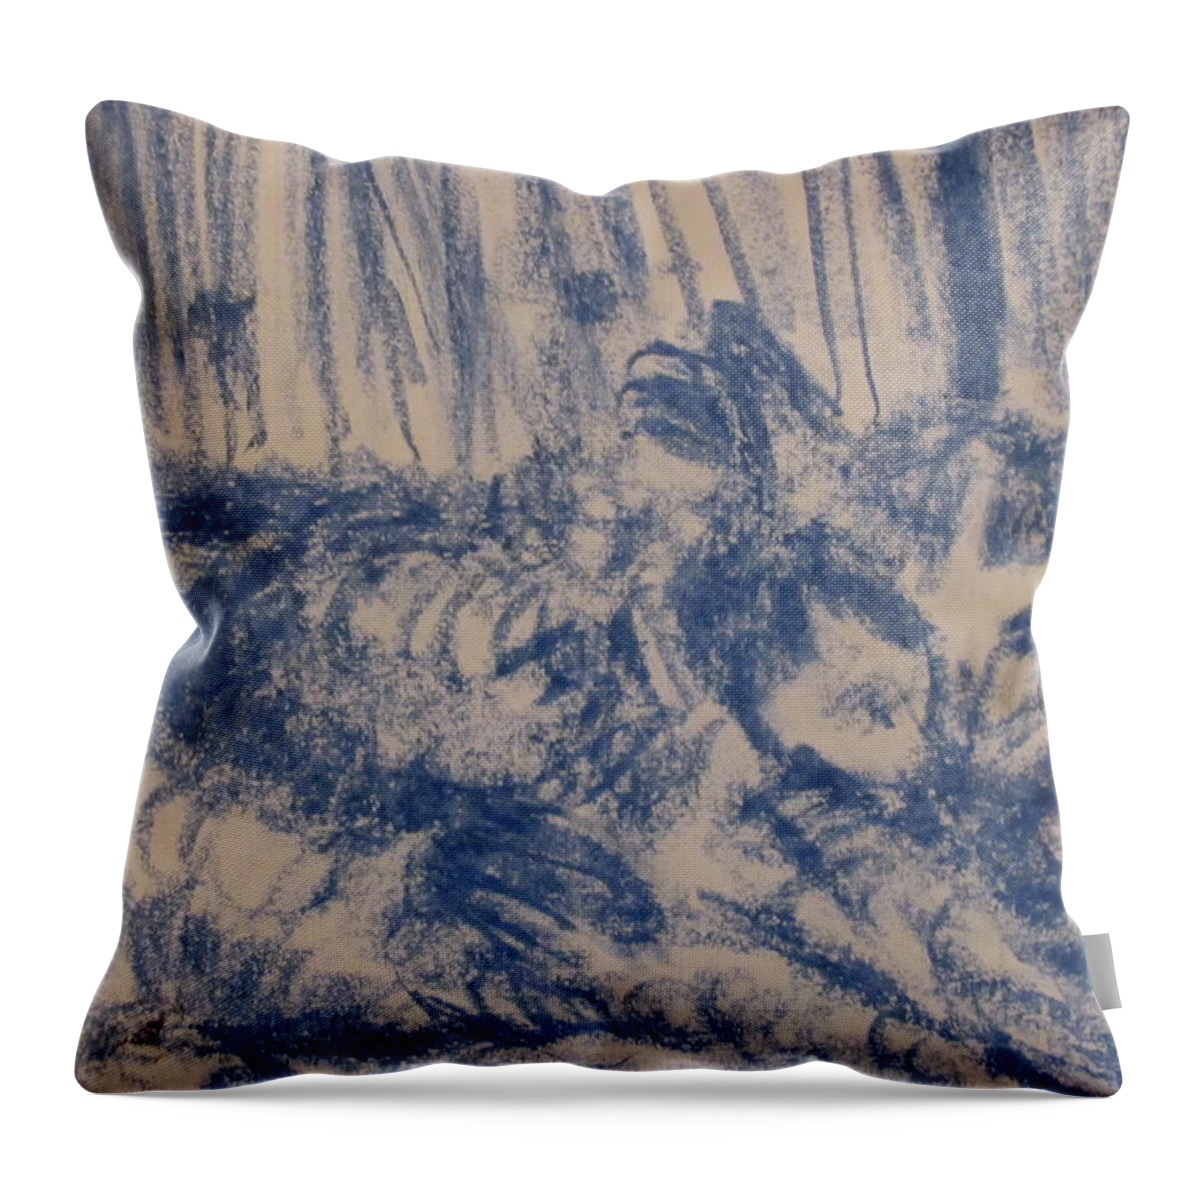 Blue Throw Pillow featuring the painting This Cat's Just Chilling by Shea Holliman